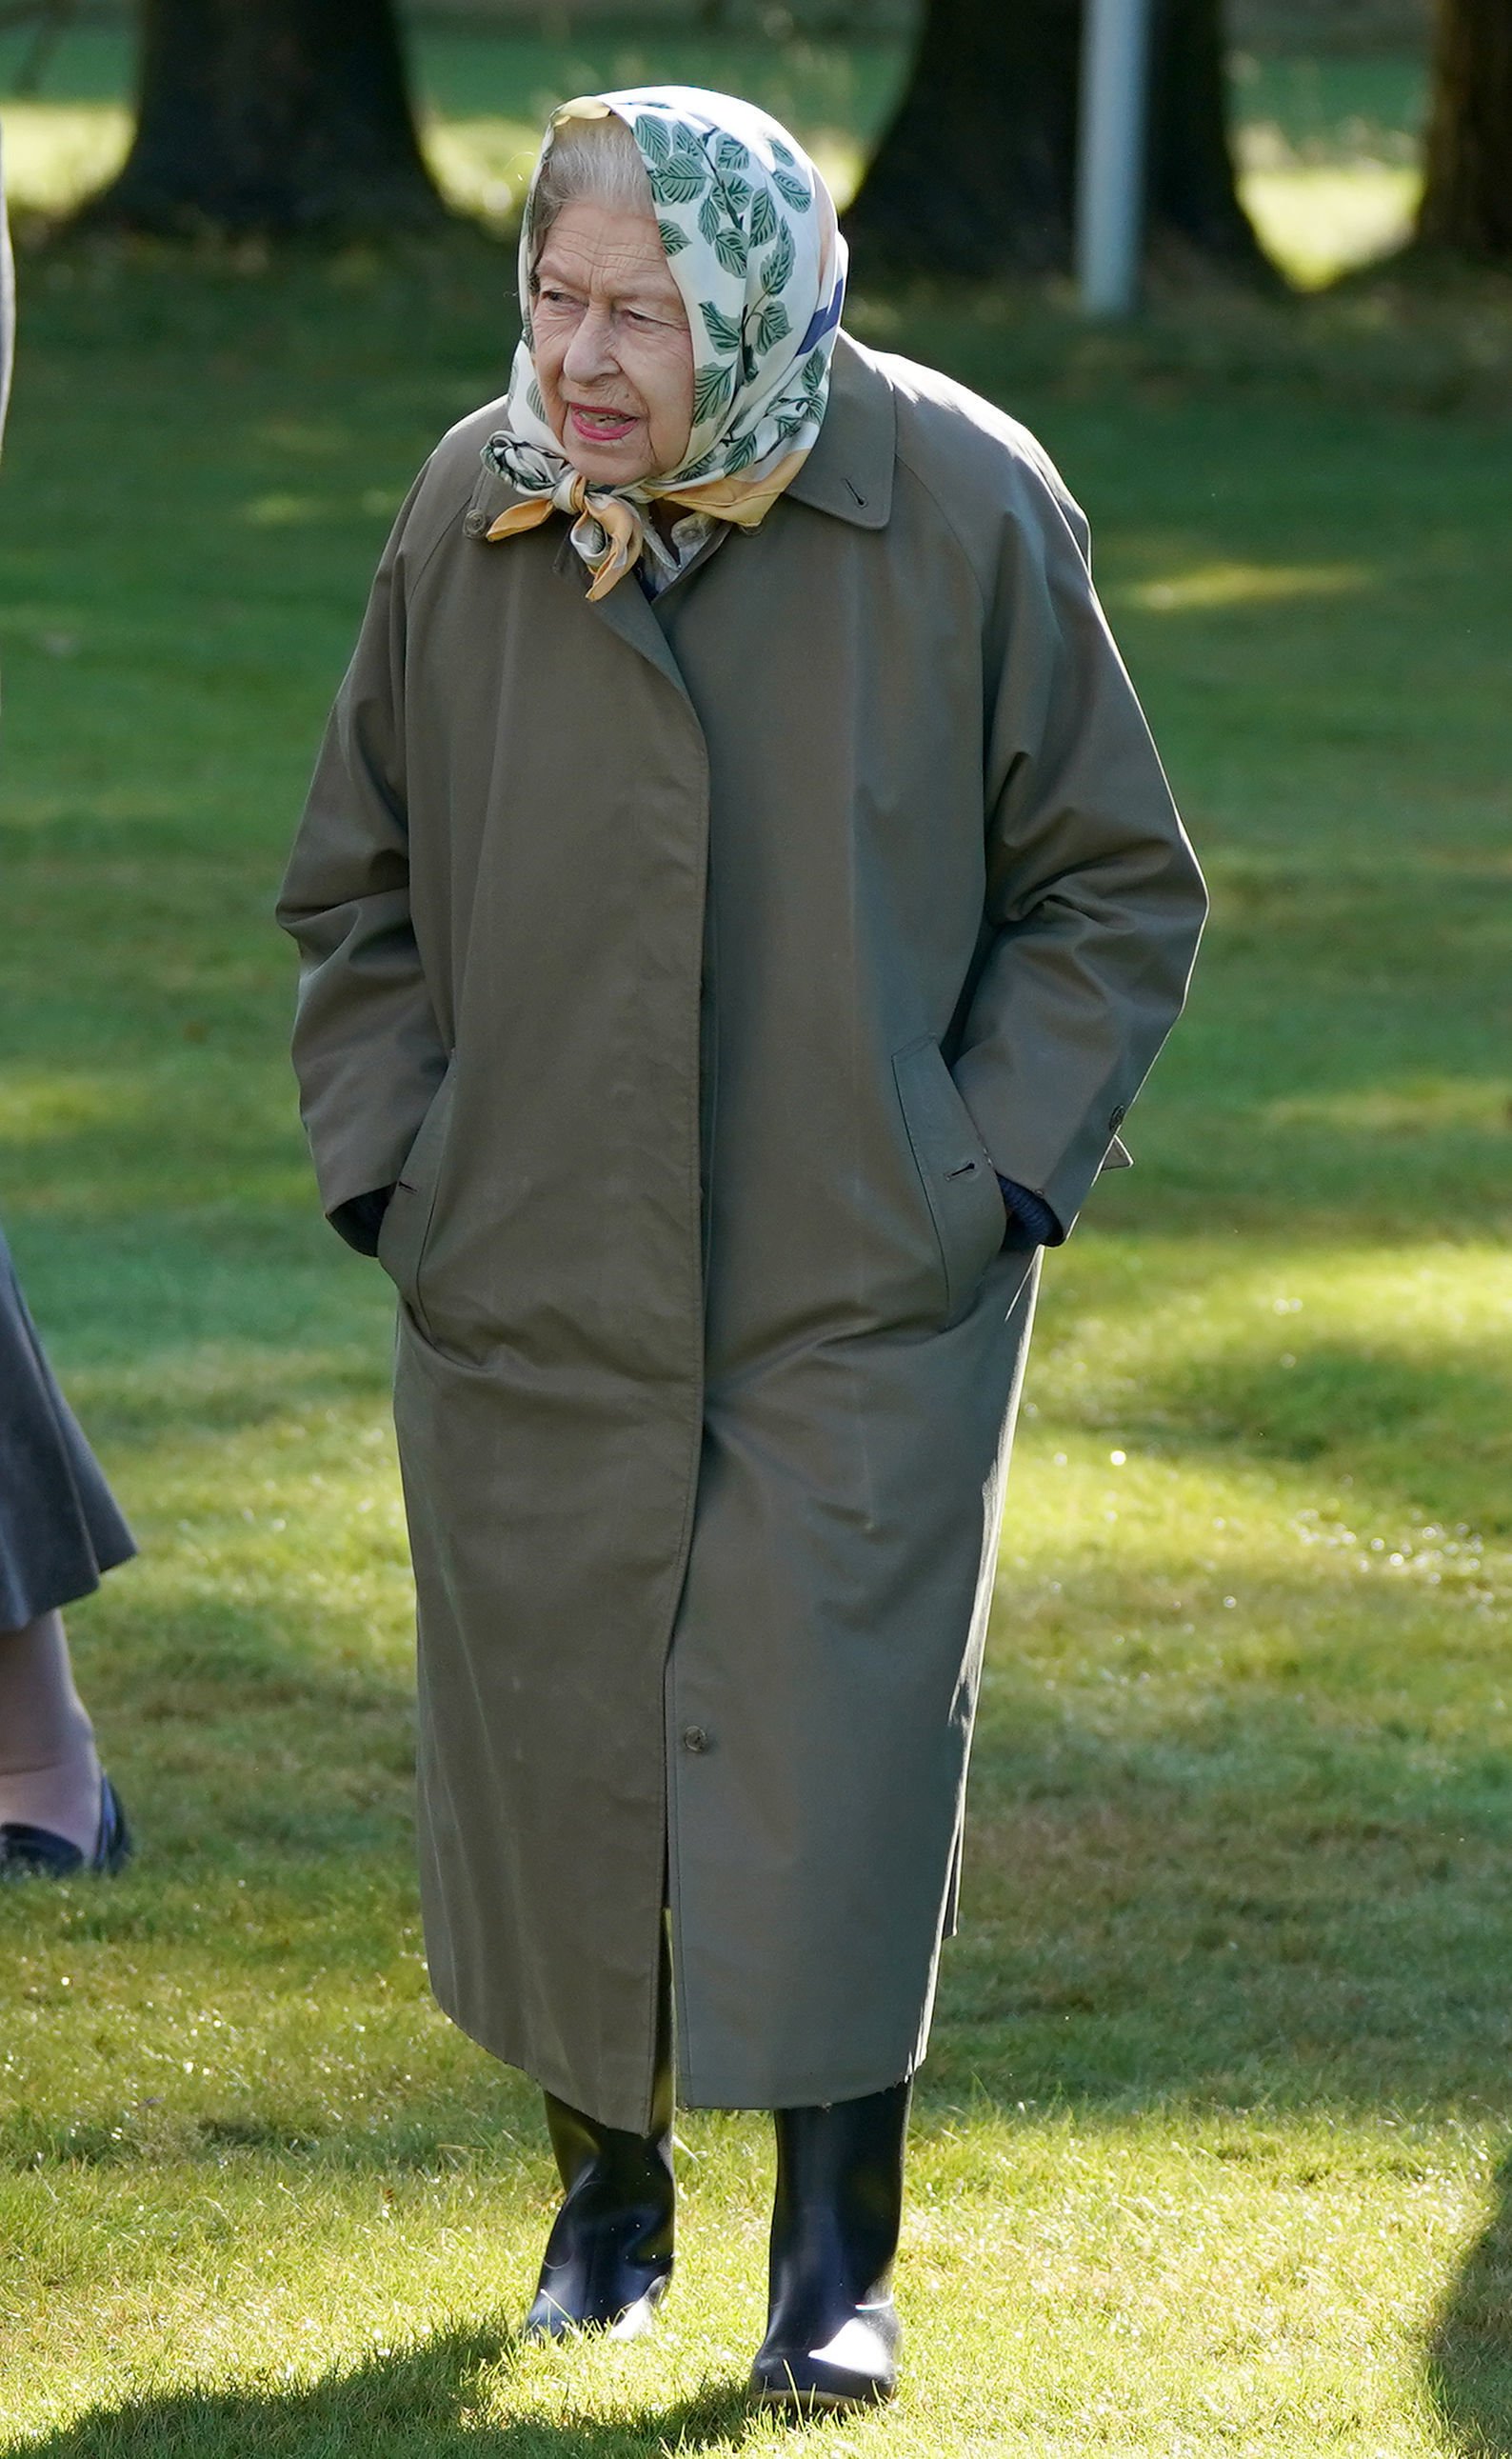 The Queen at the Balmoral Estate Cricket Pavilion on October 1, 2021, near Crathie, Scotland. | Source: Getty Images